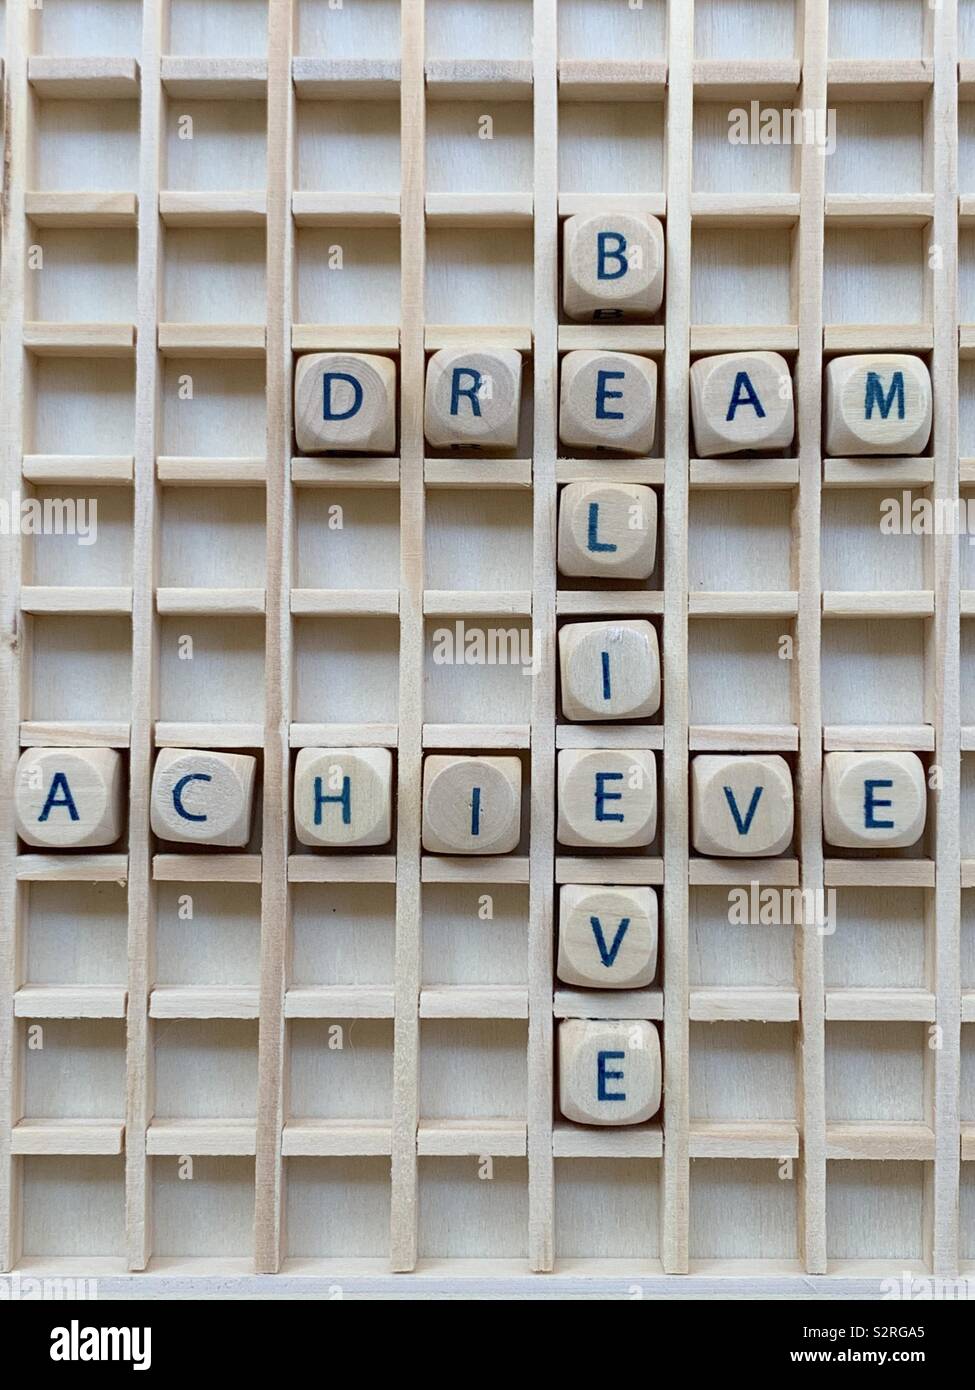 Believe, dream, achive, motivational cross words composed with wooden cube dice letters Stock Photo